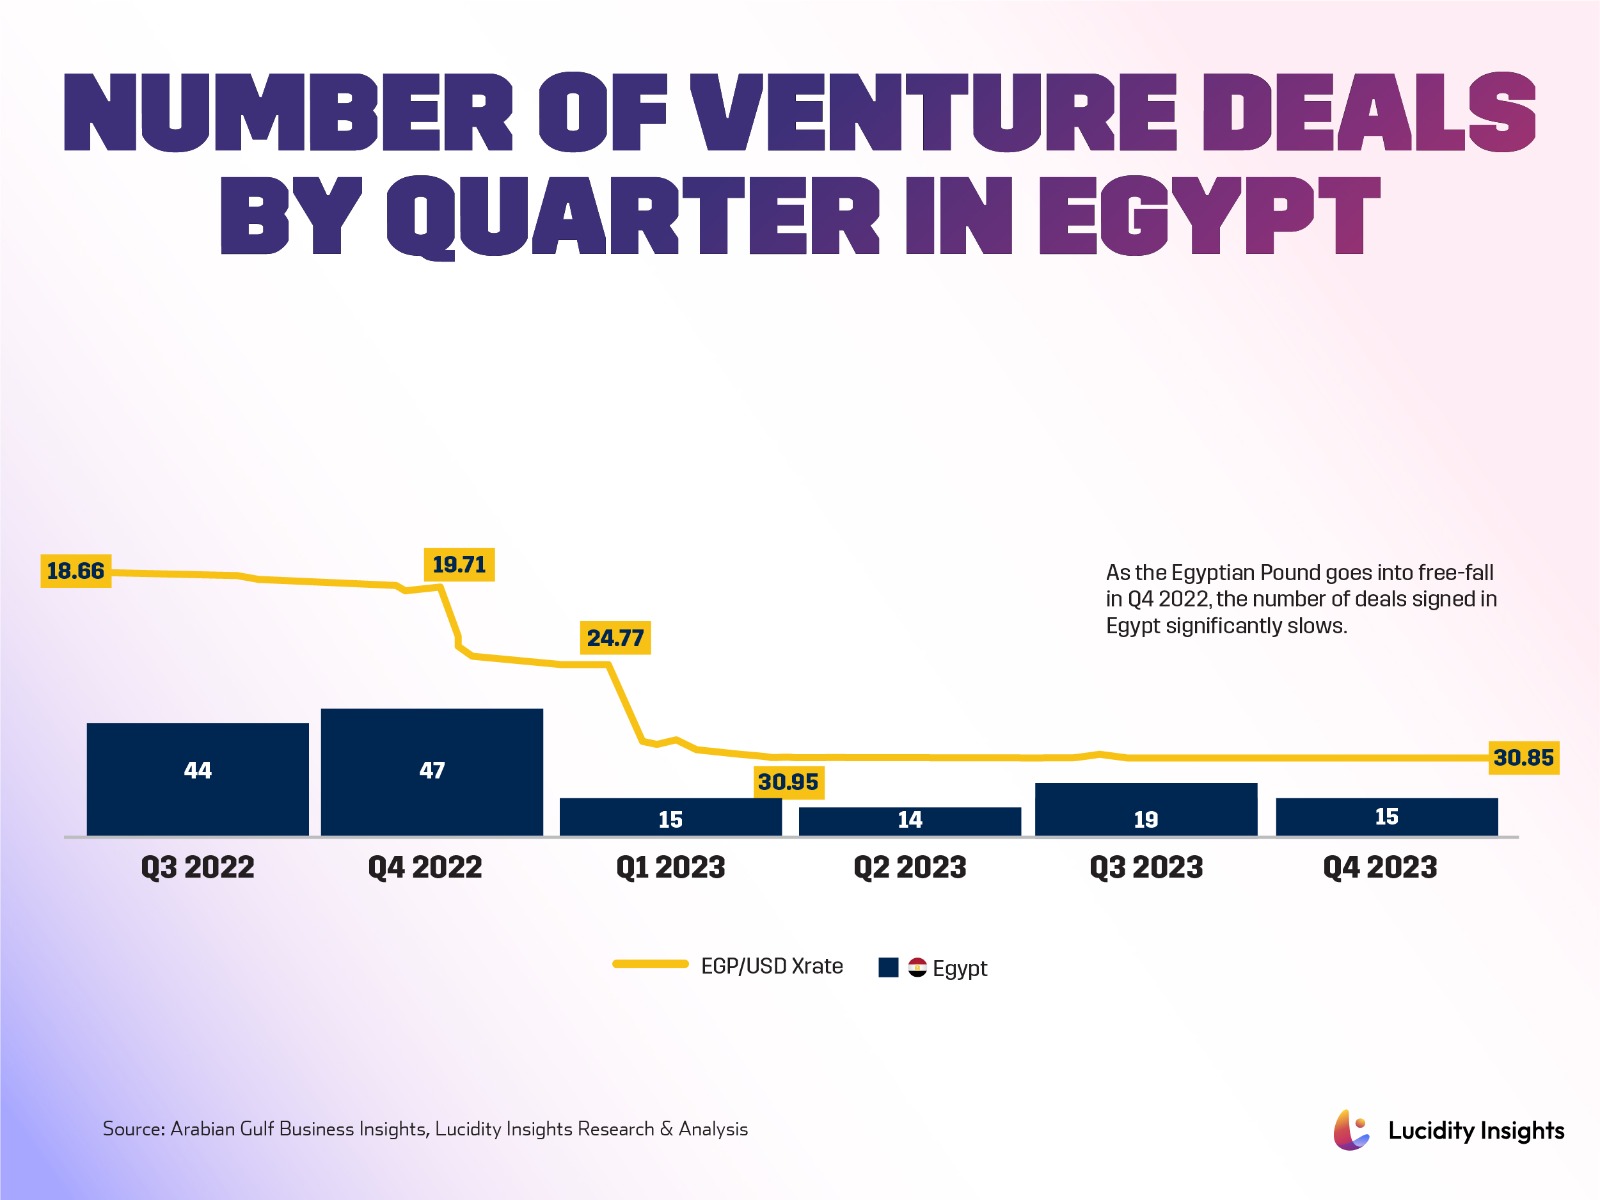 Number of Venture Deals by Quarter in Egypt